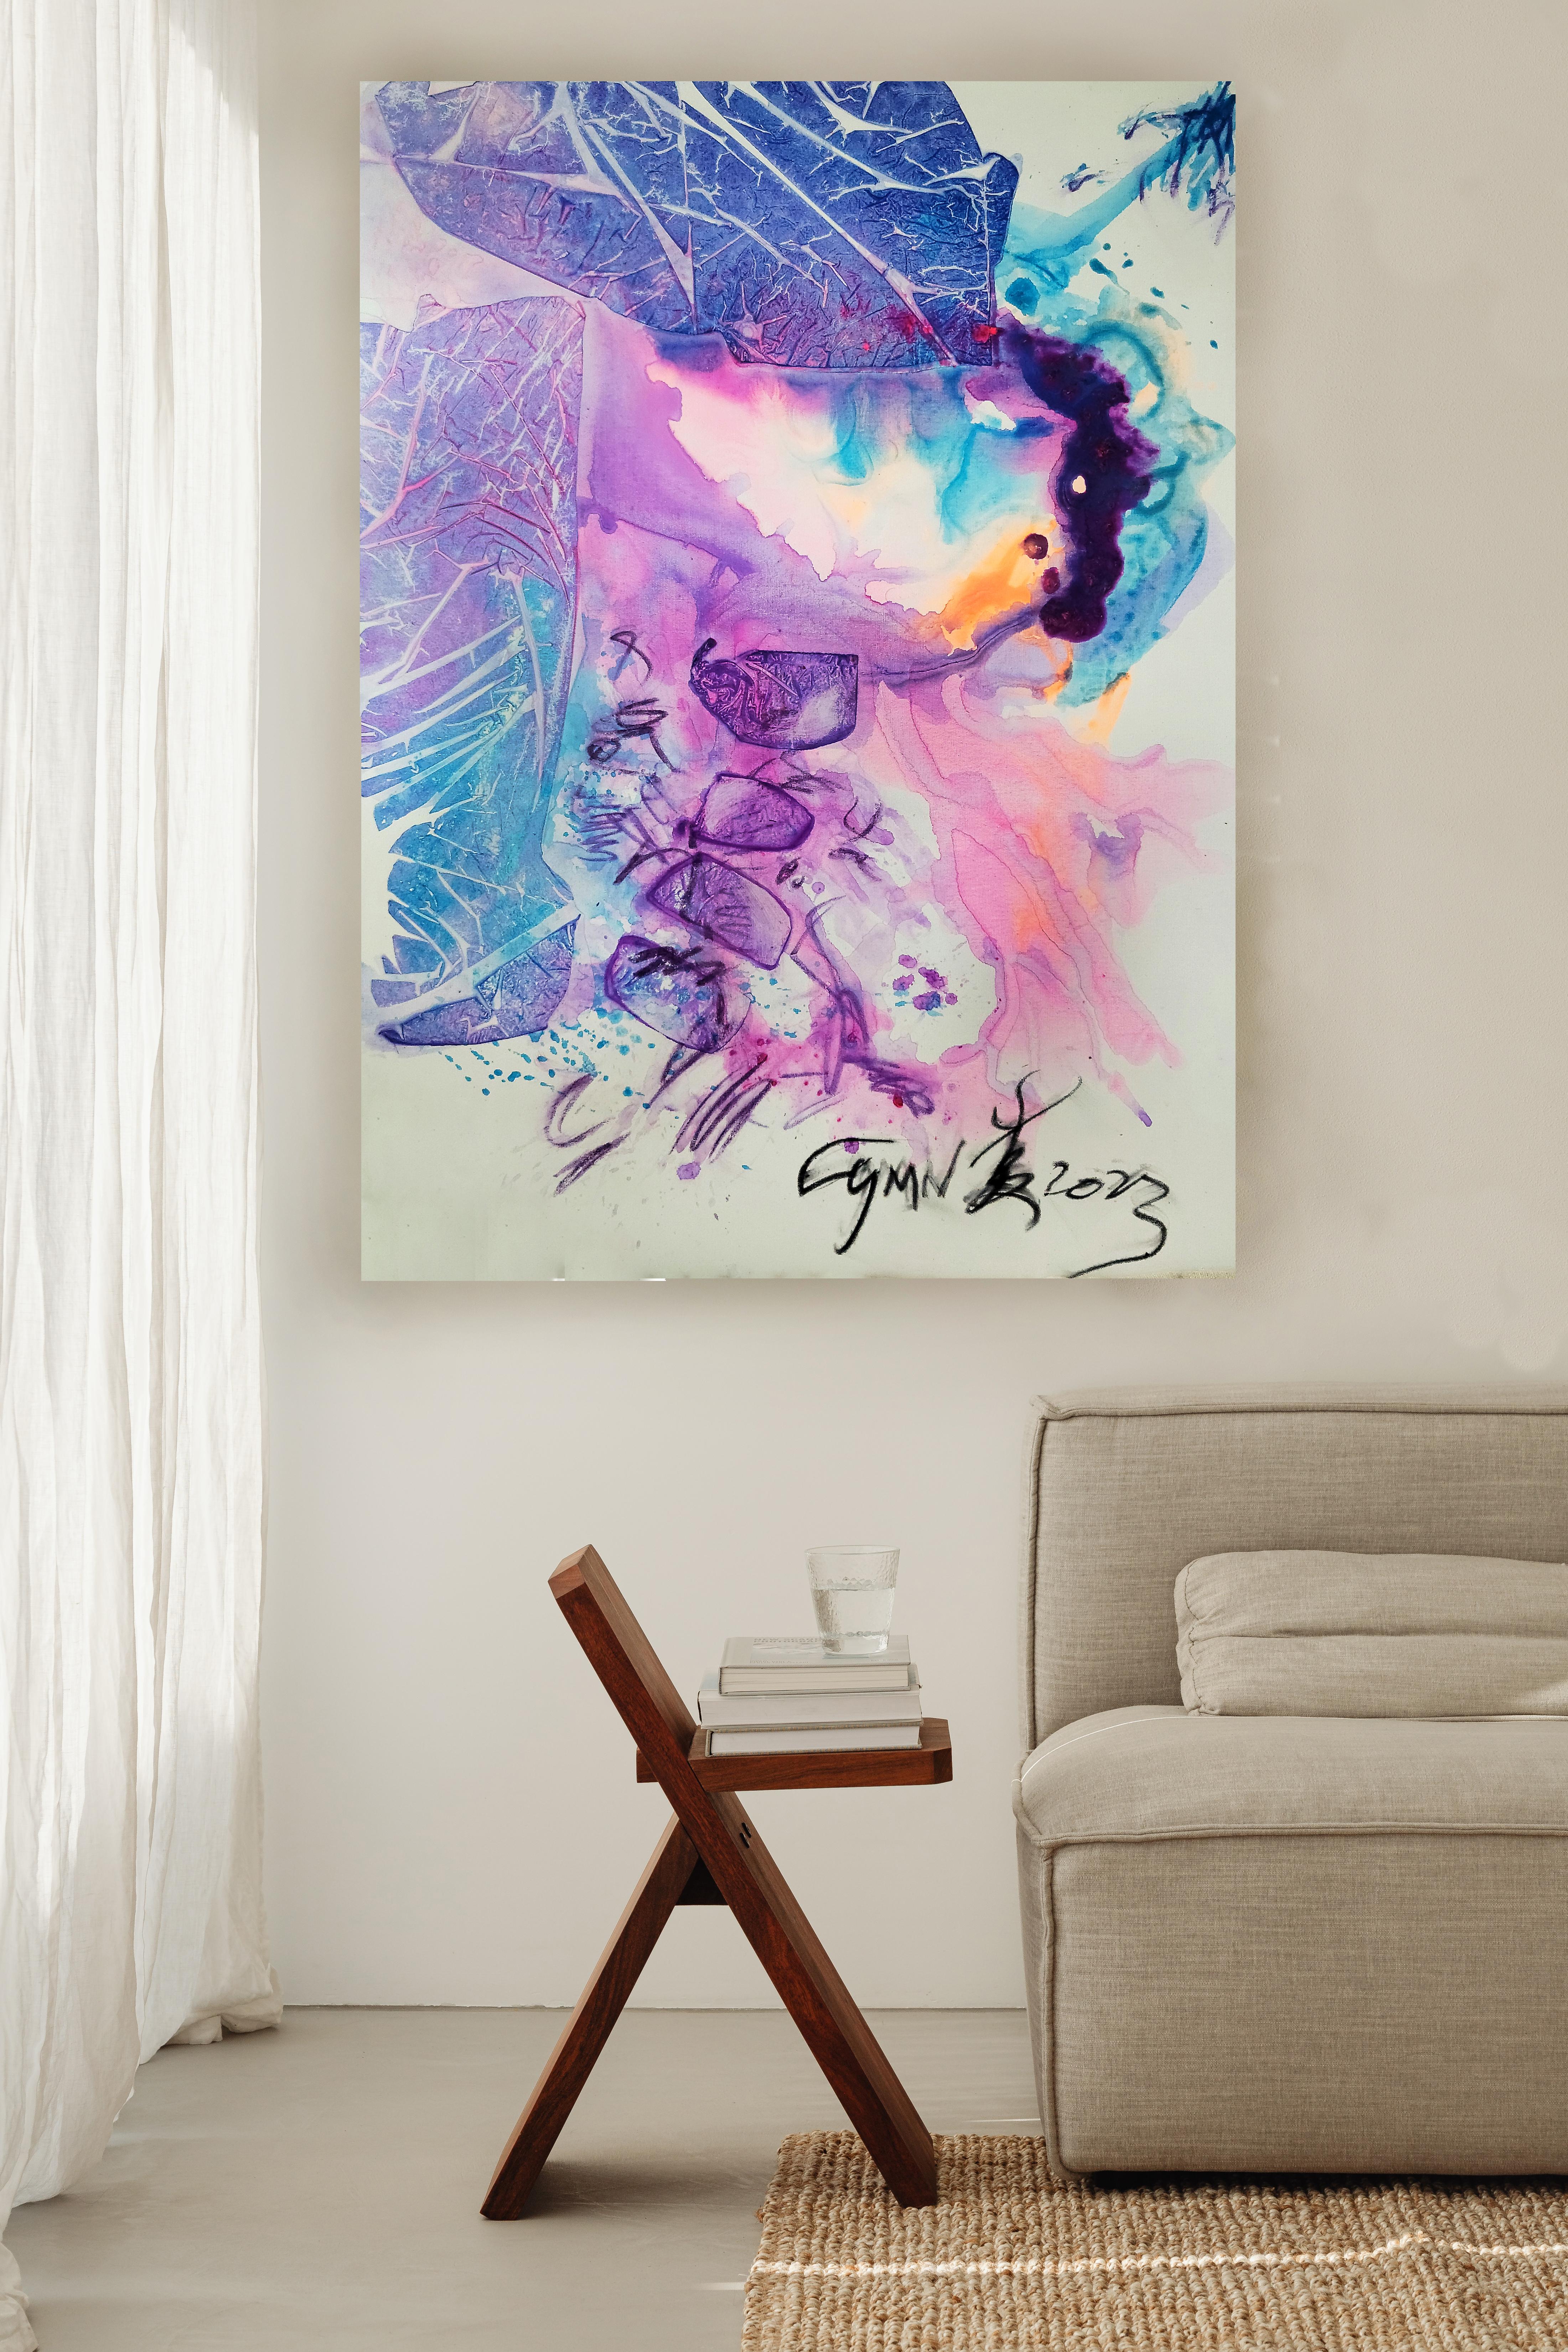 Path to Serene Enlightenment-Fresh Bright, Colorful Abstract, Zen Calligraphy - Abstract Expressionist Painting by Cymn Wong 